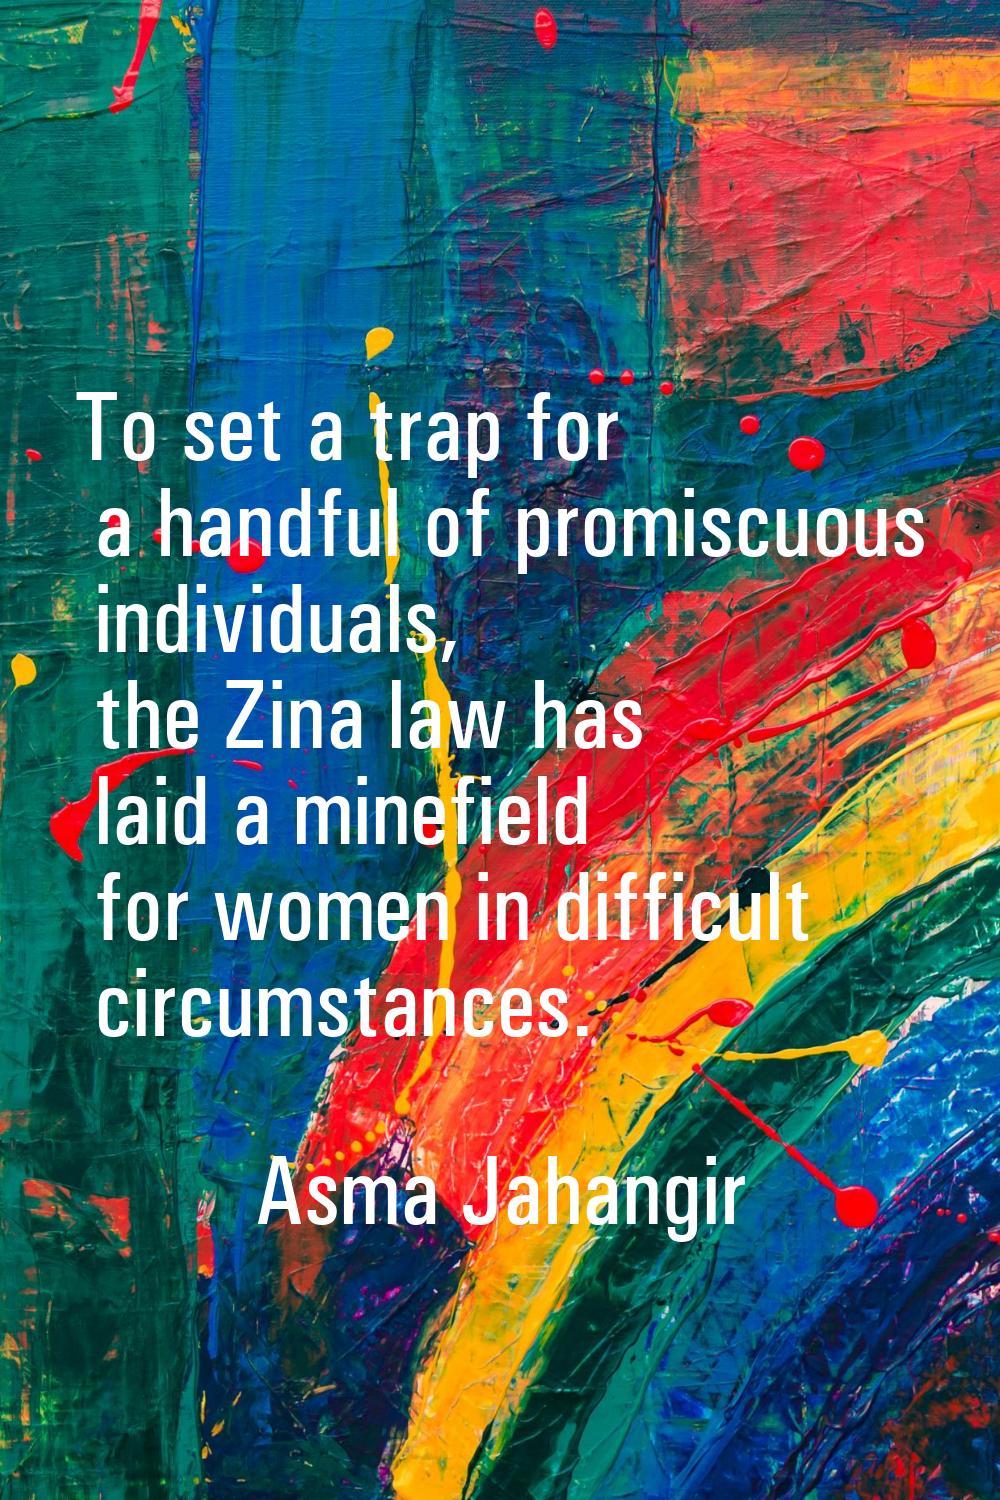 To set a trap for a handful of promiscuous individuals, the Zina law has laid a minefield for women